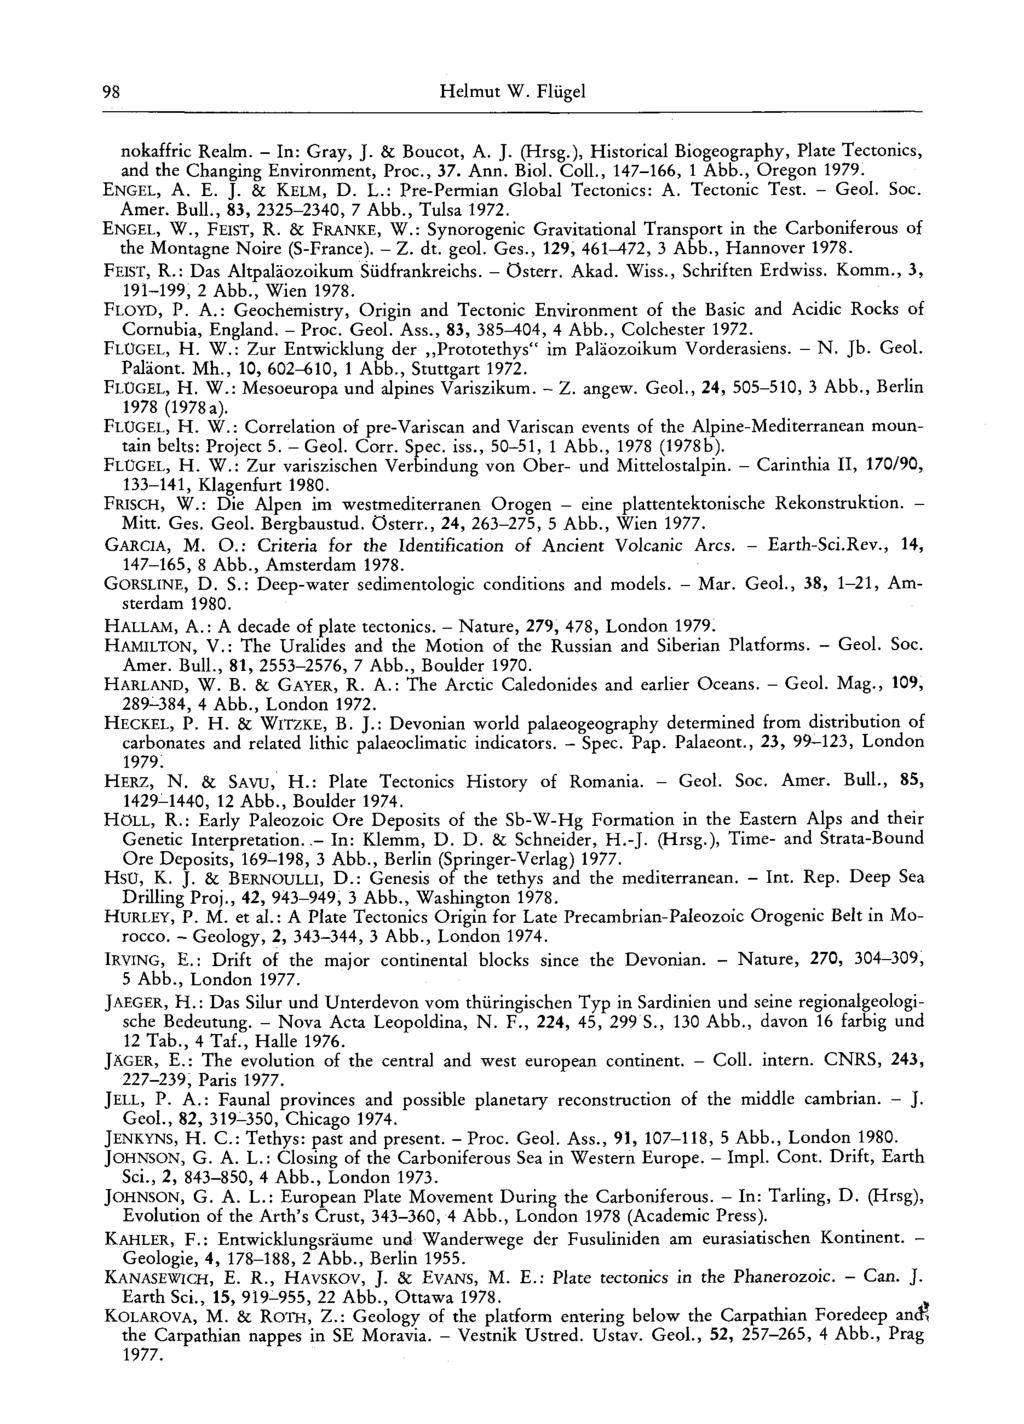 98 Helmut W. Flügel nokaffric Realm. - In: Gray, J. & Boucot, A. J. (Hrsg.), Historical Biogeography, Plate Tectonics, and the Changing Environment, Proc, 37. Ann. Biol. Coll., 147-166, 1 Abb.